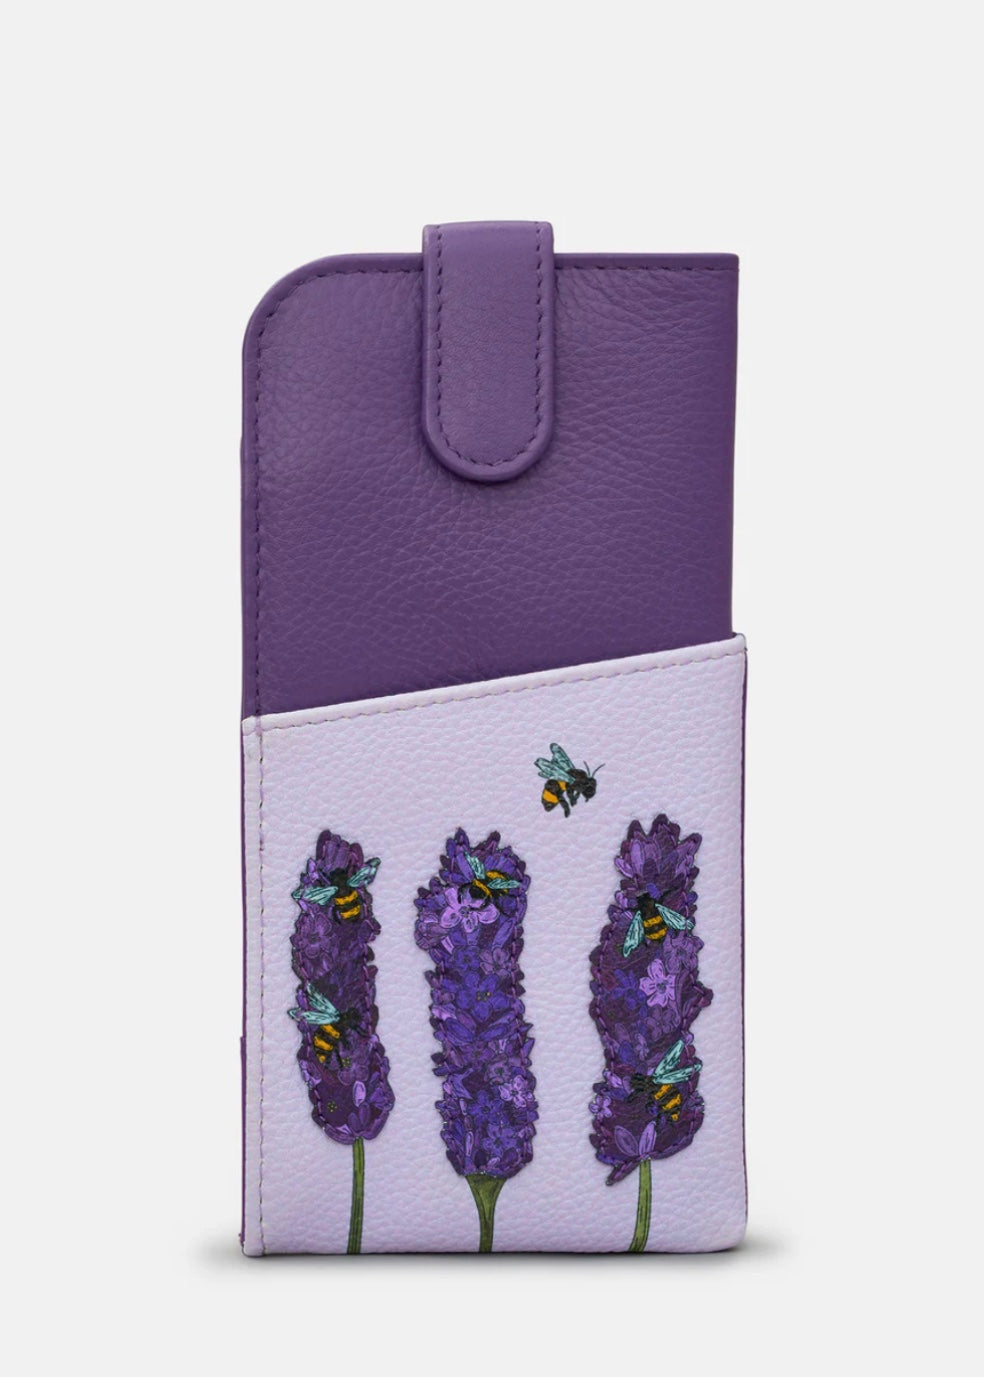 Yoshi Leather - Bees Love Lavender Glasses Case / Plum